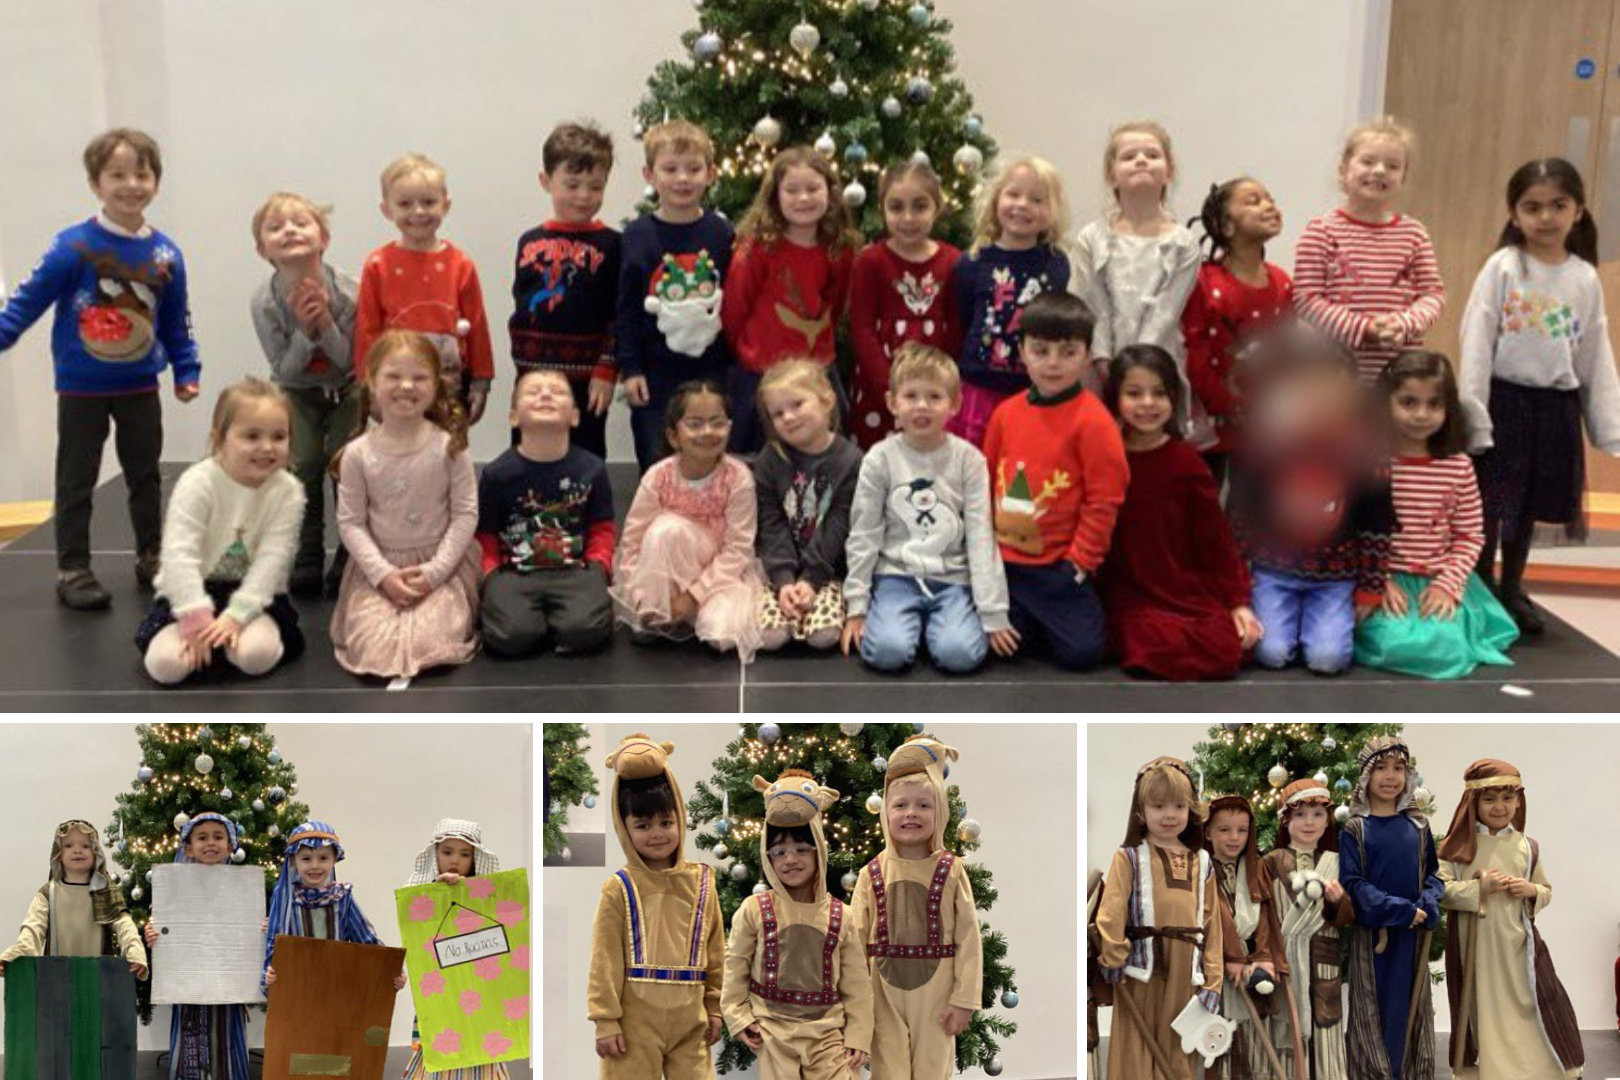 Children pose in front of the Christmas tree in their nativity costumes and Christmas jumpers